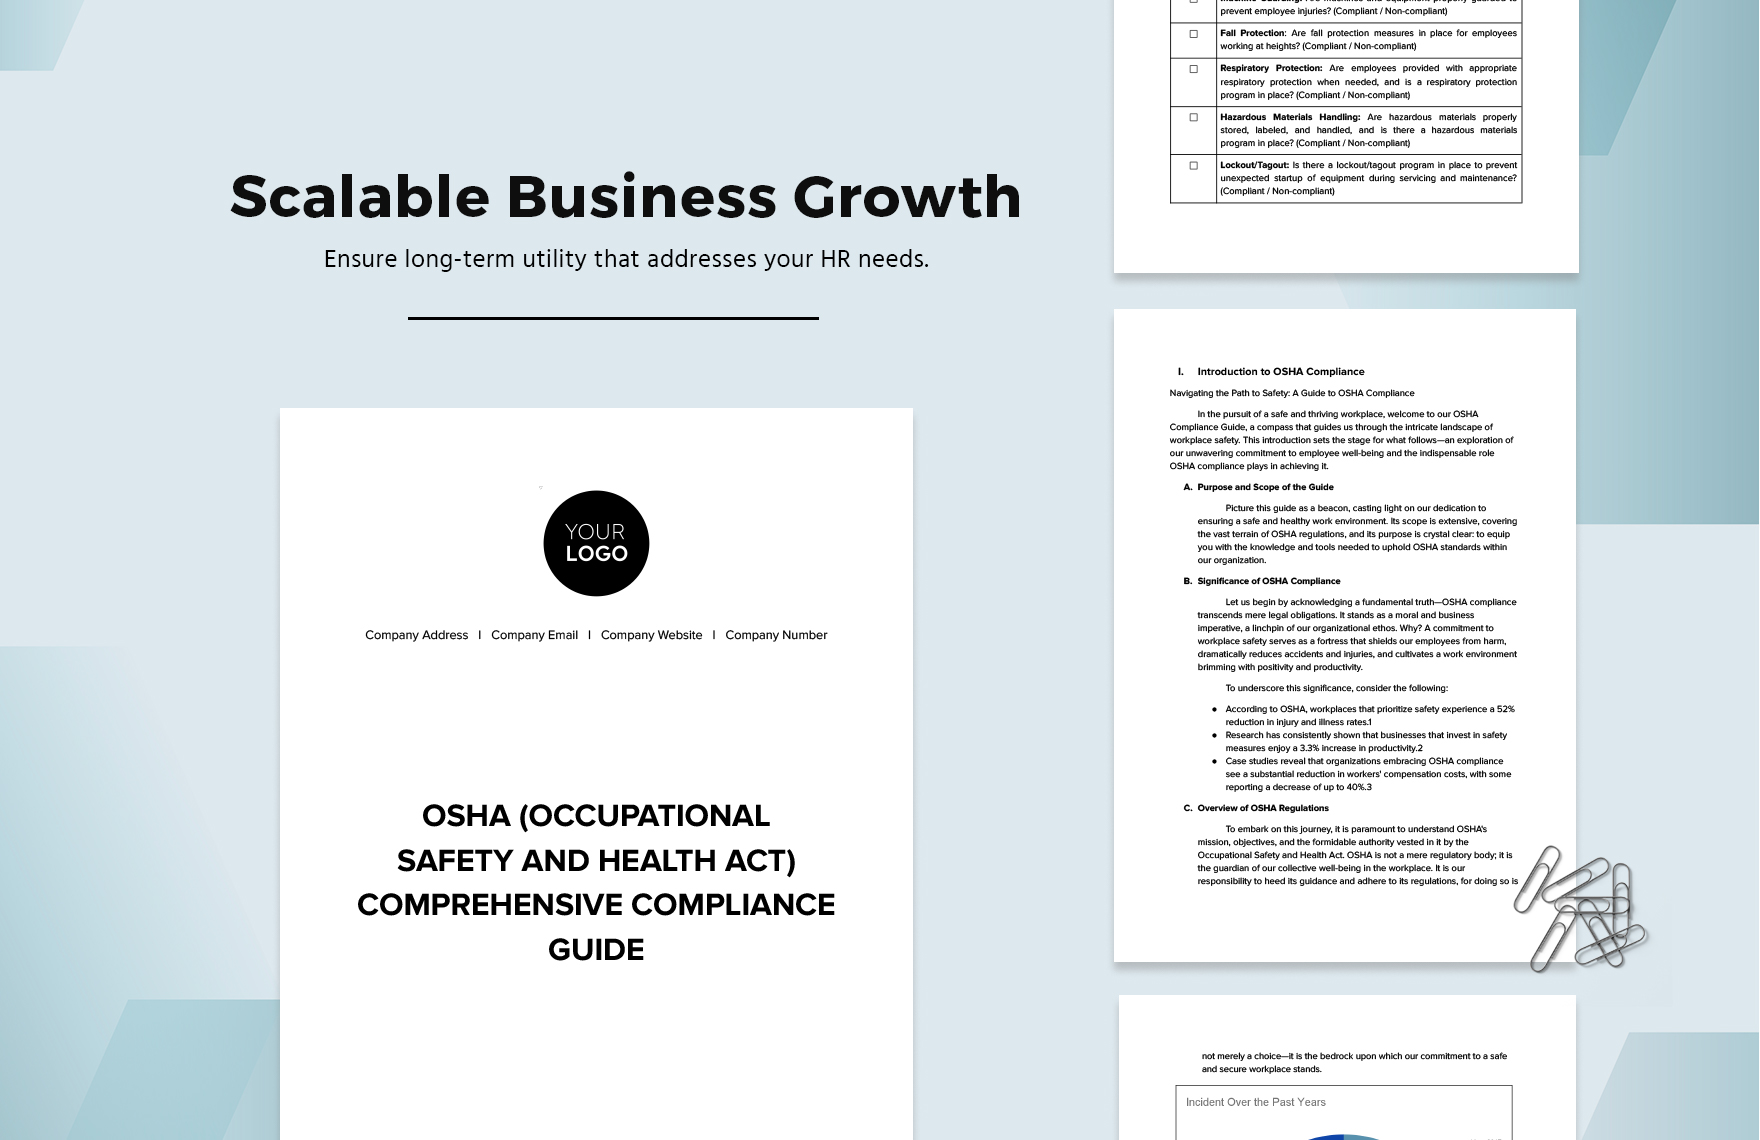 OSHA (Occupational Safety and Health Act) Comprehensive Compliance Guide HR Template